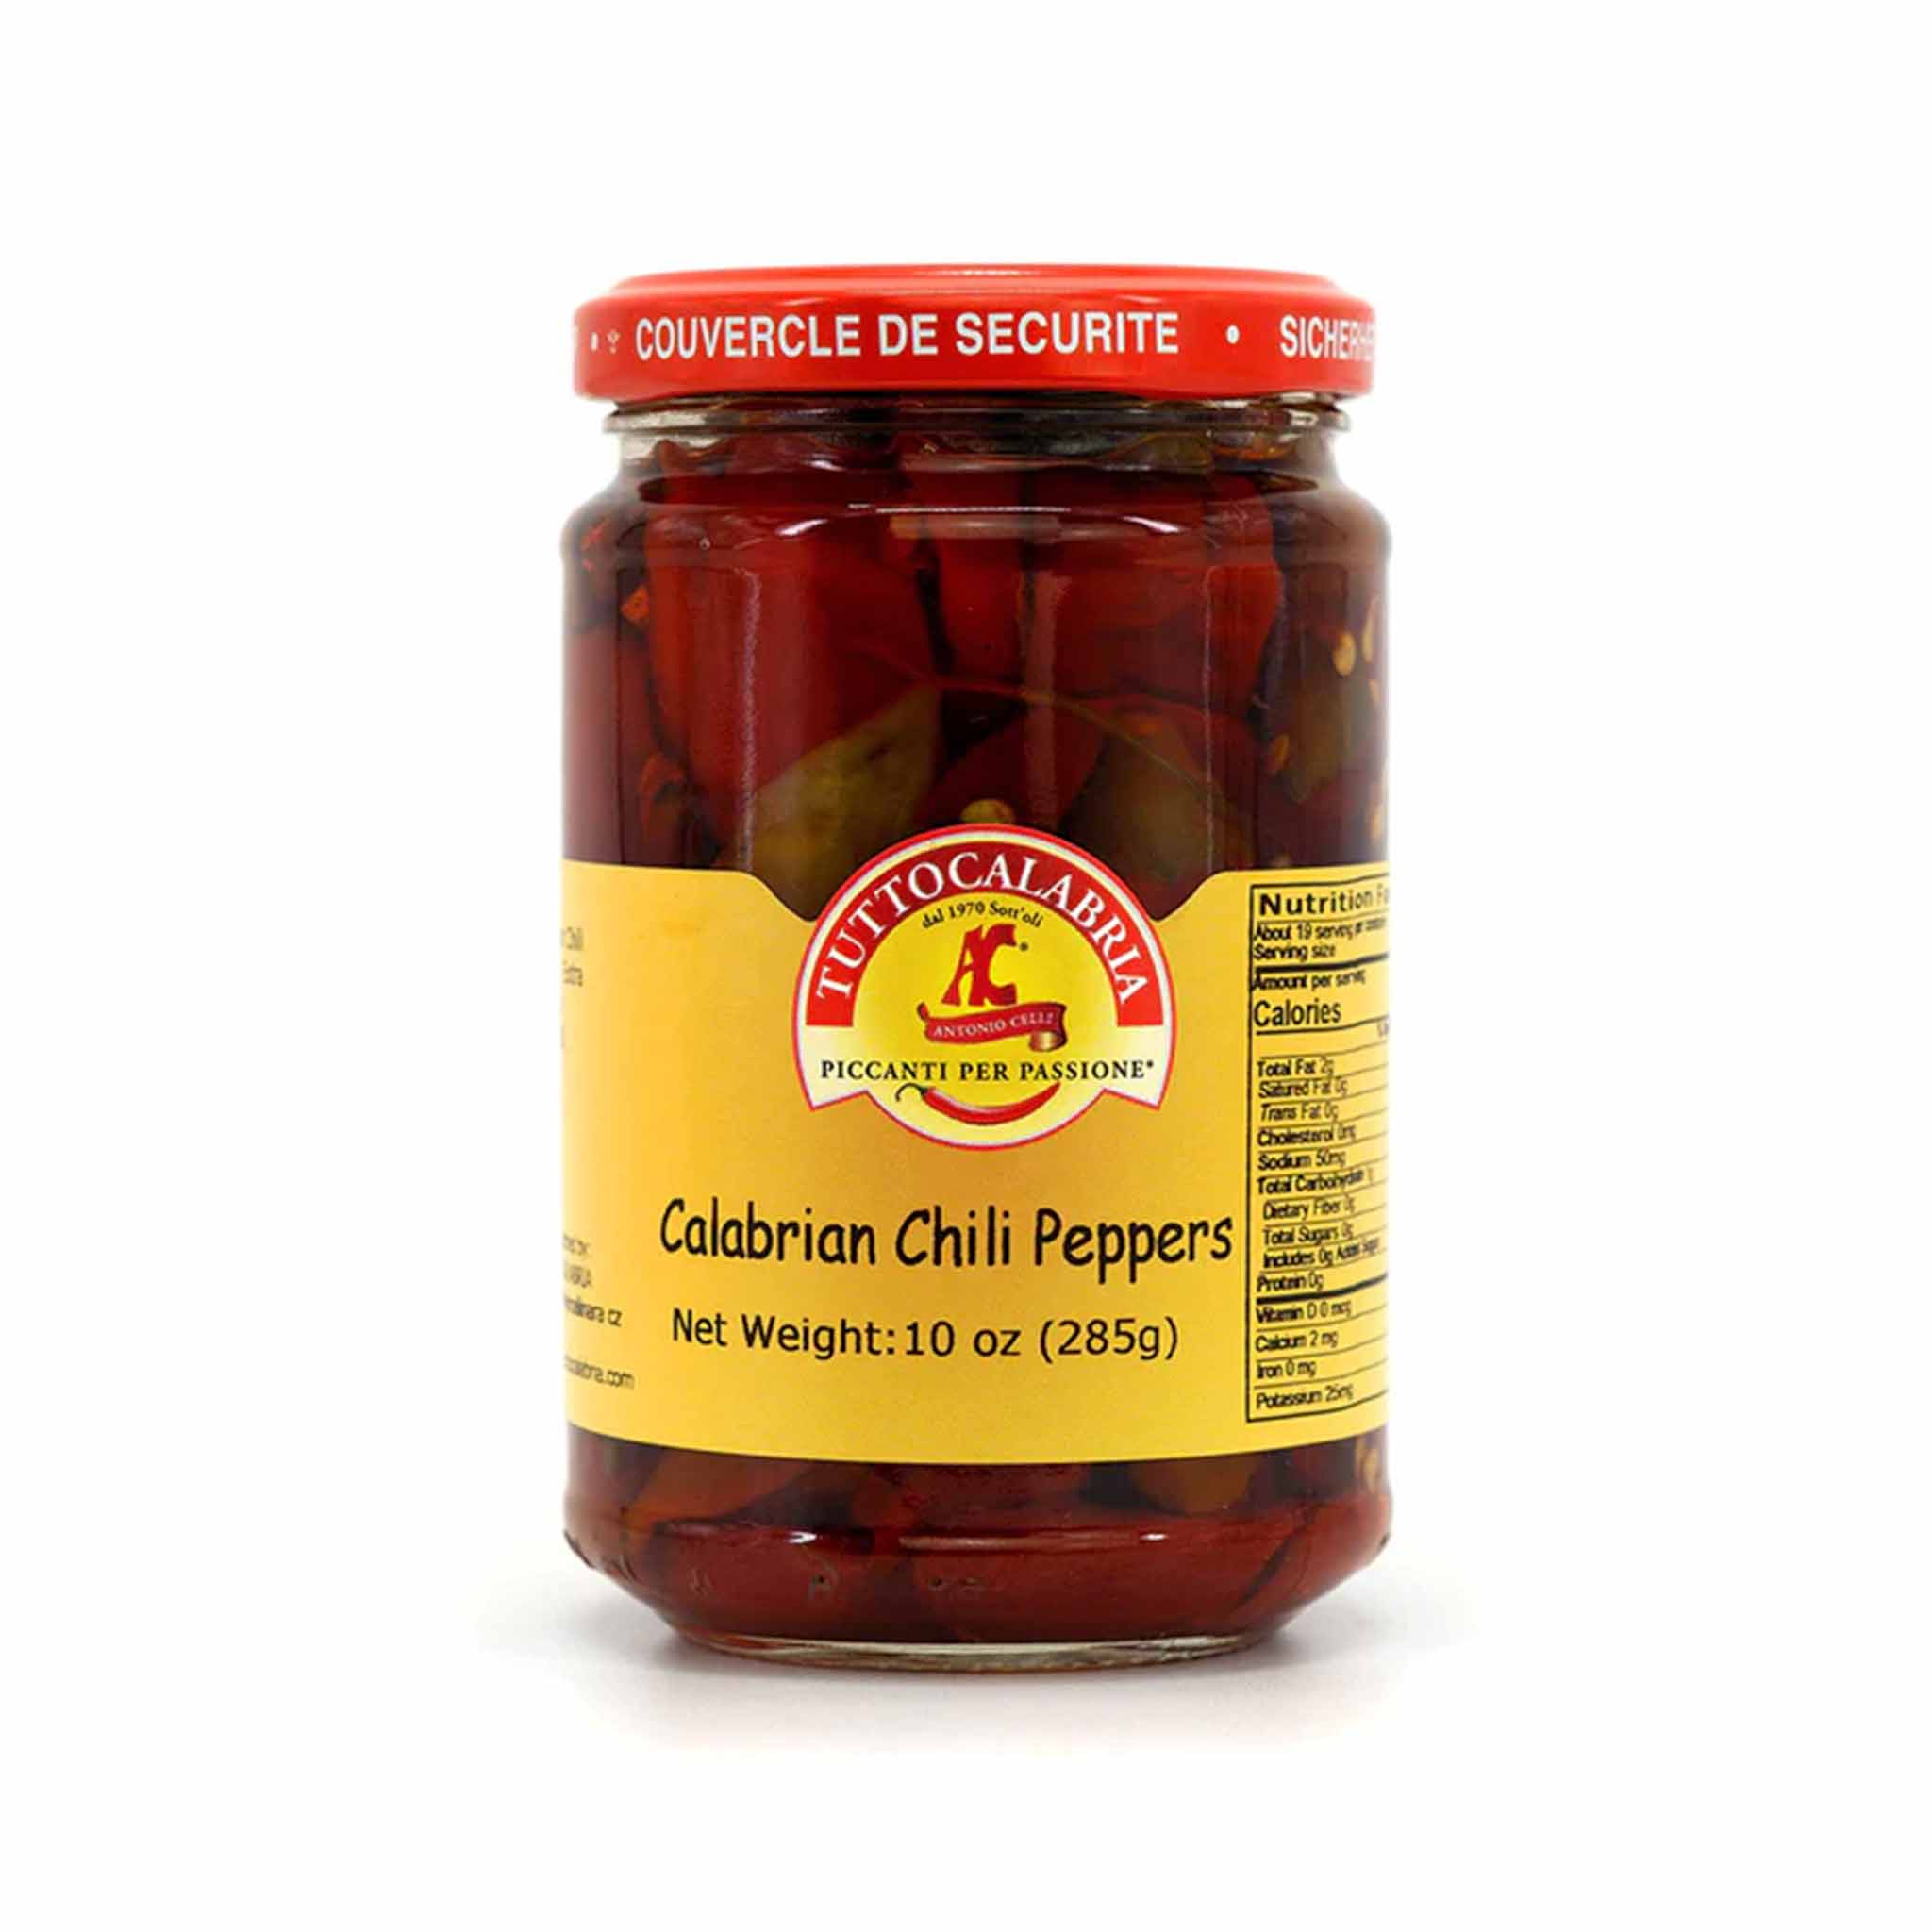 TUTTO CALABRIA WHOLE CHILIS IN EXTRA VIRGIN OLIVE OIL 285g